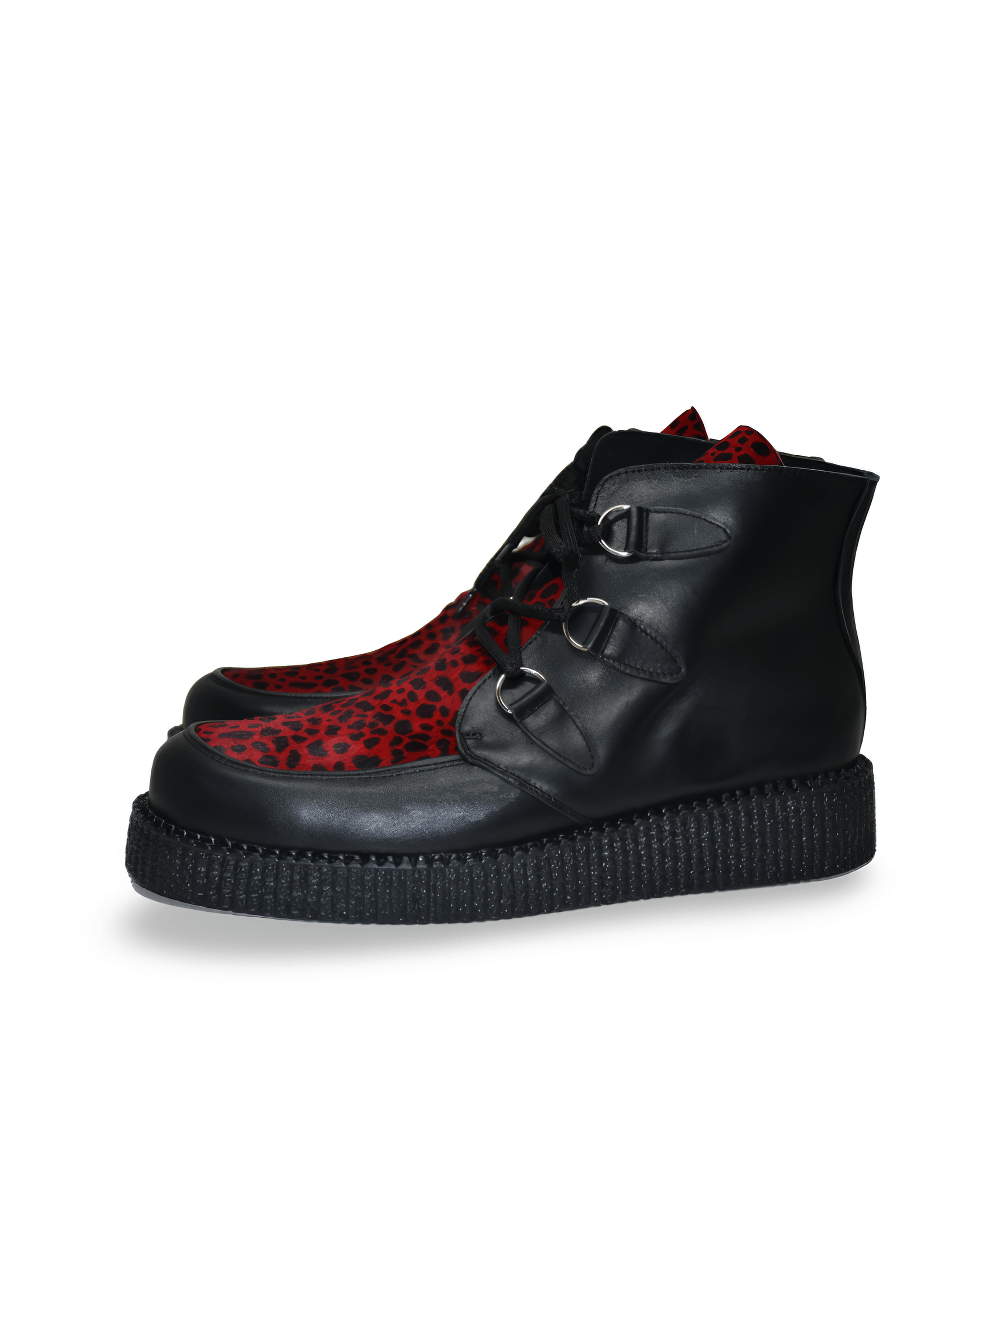 Unisex Ankle Black Boots in Red Leopard Print